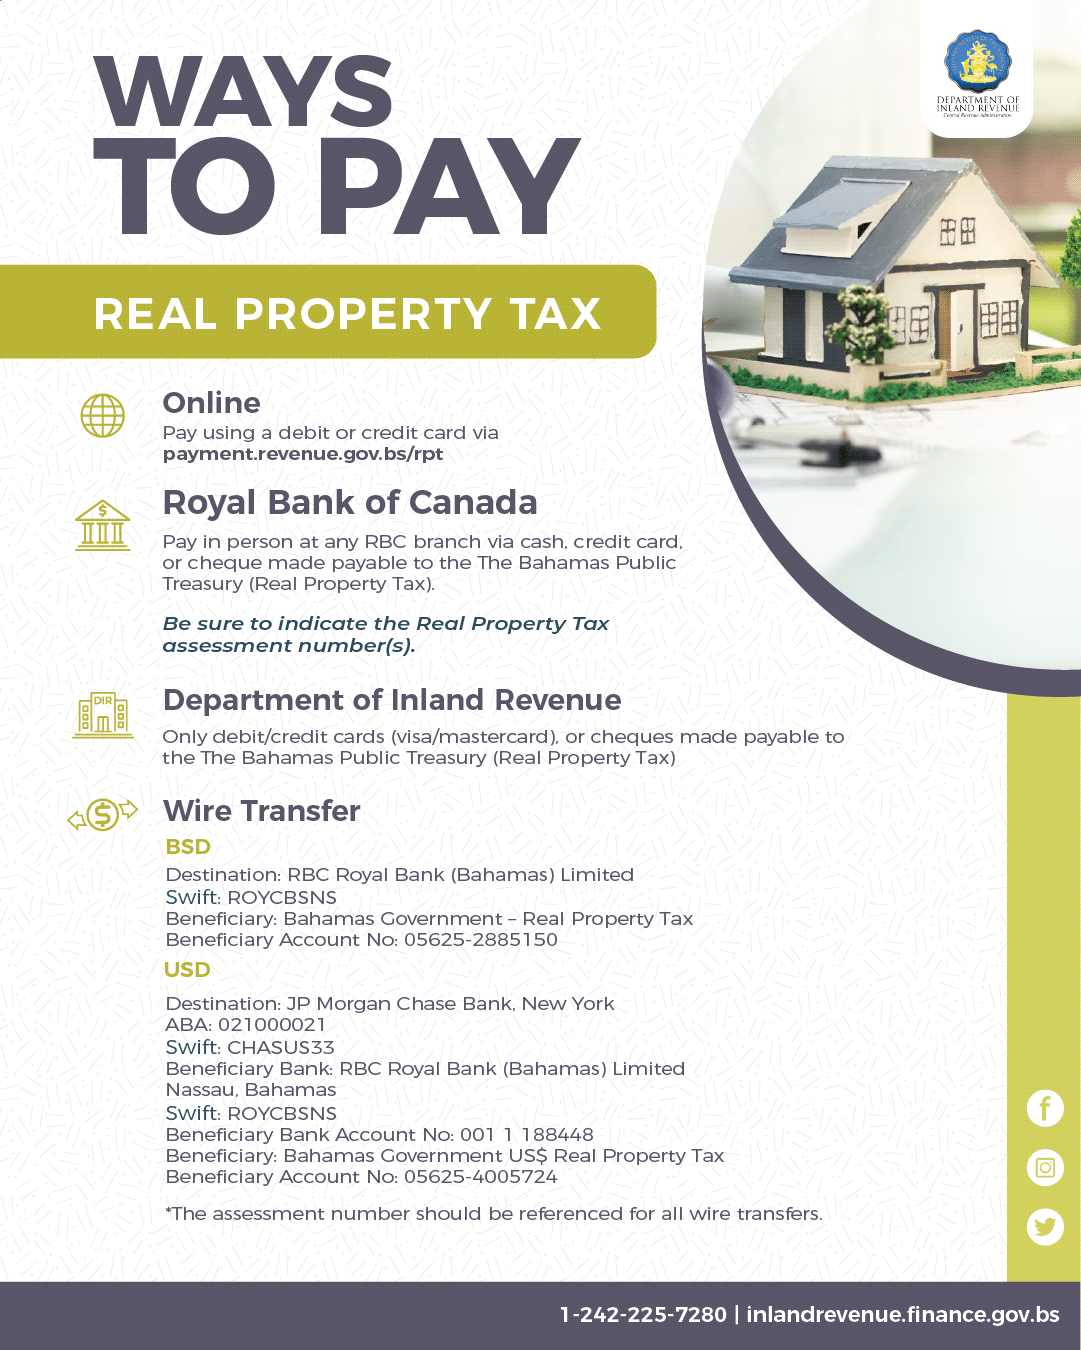 real-property-tax-department-of-inland-revenue